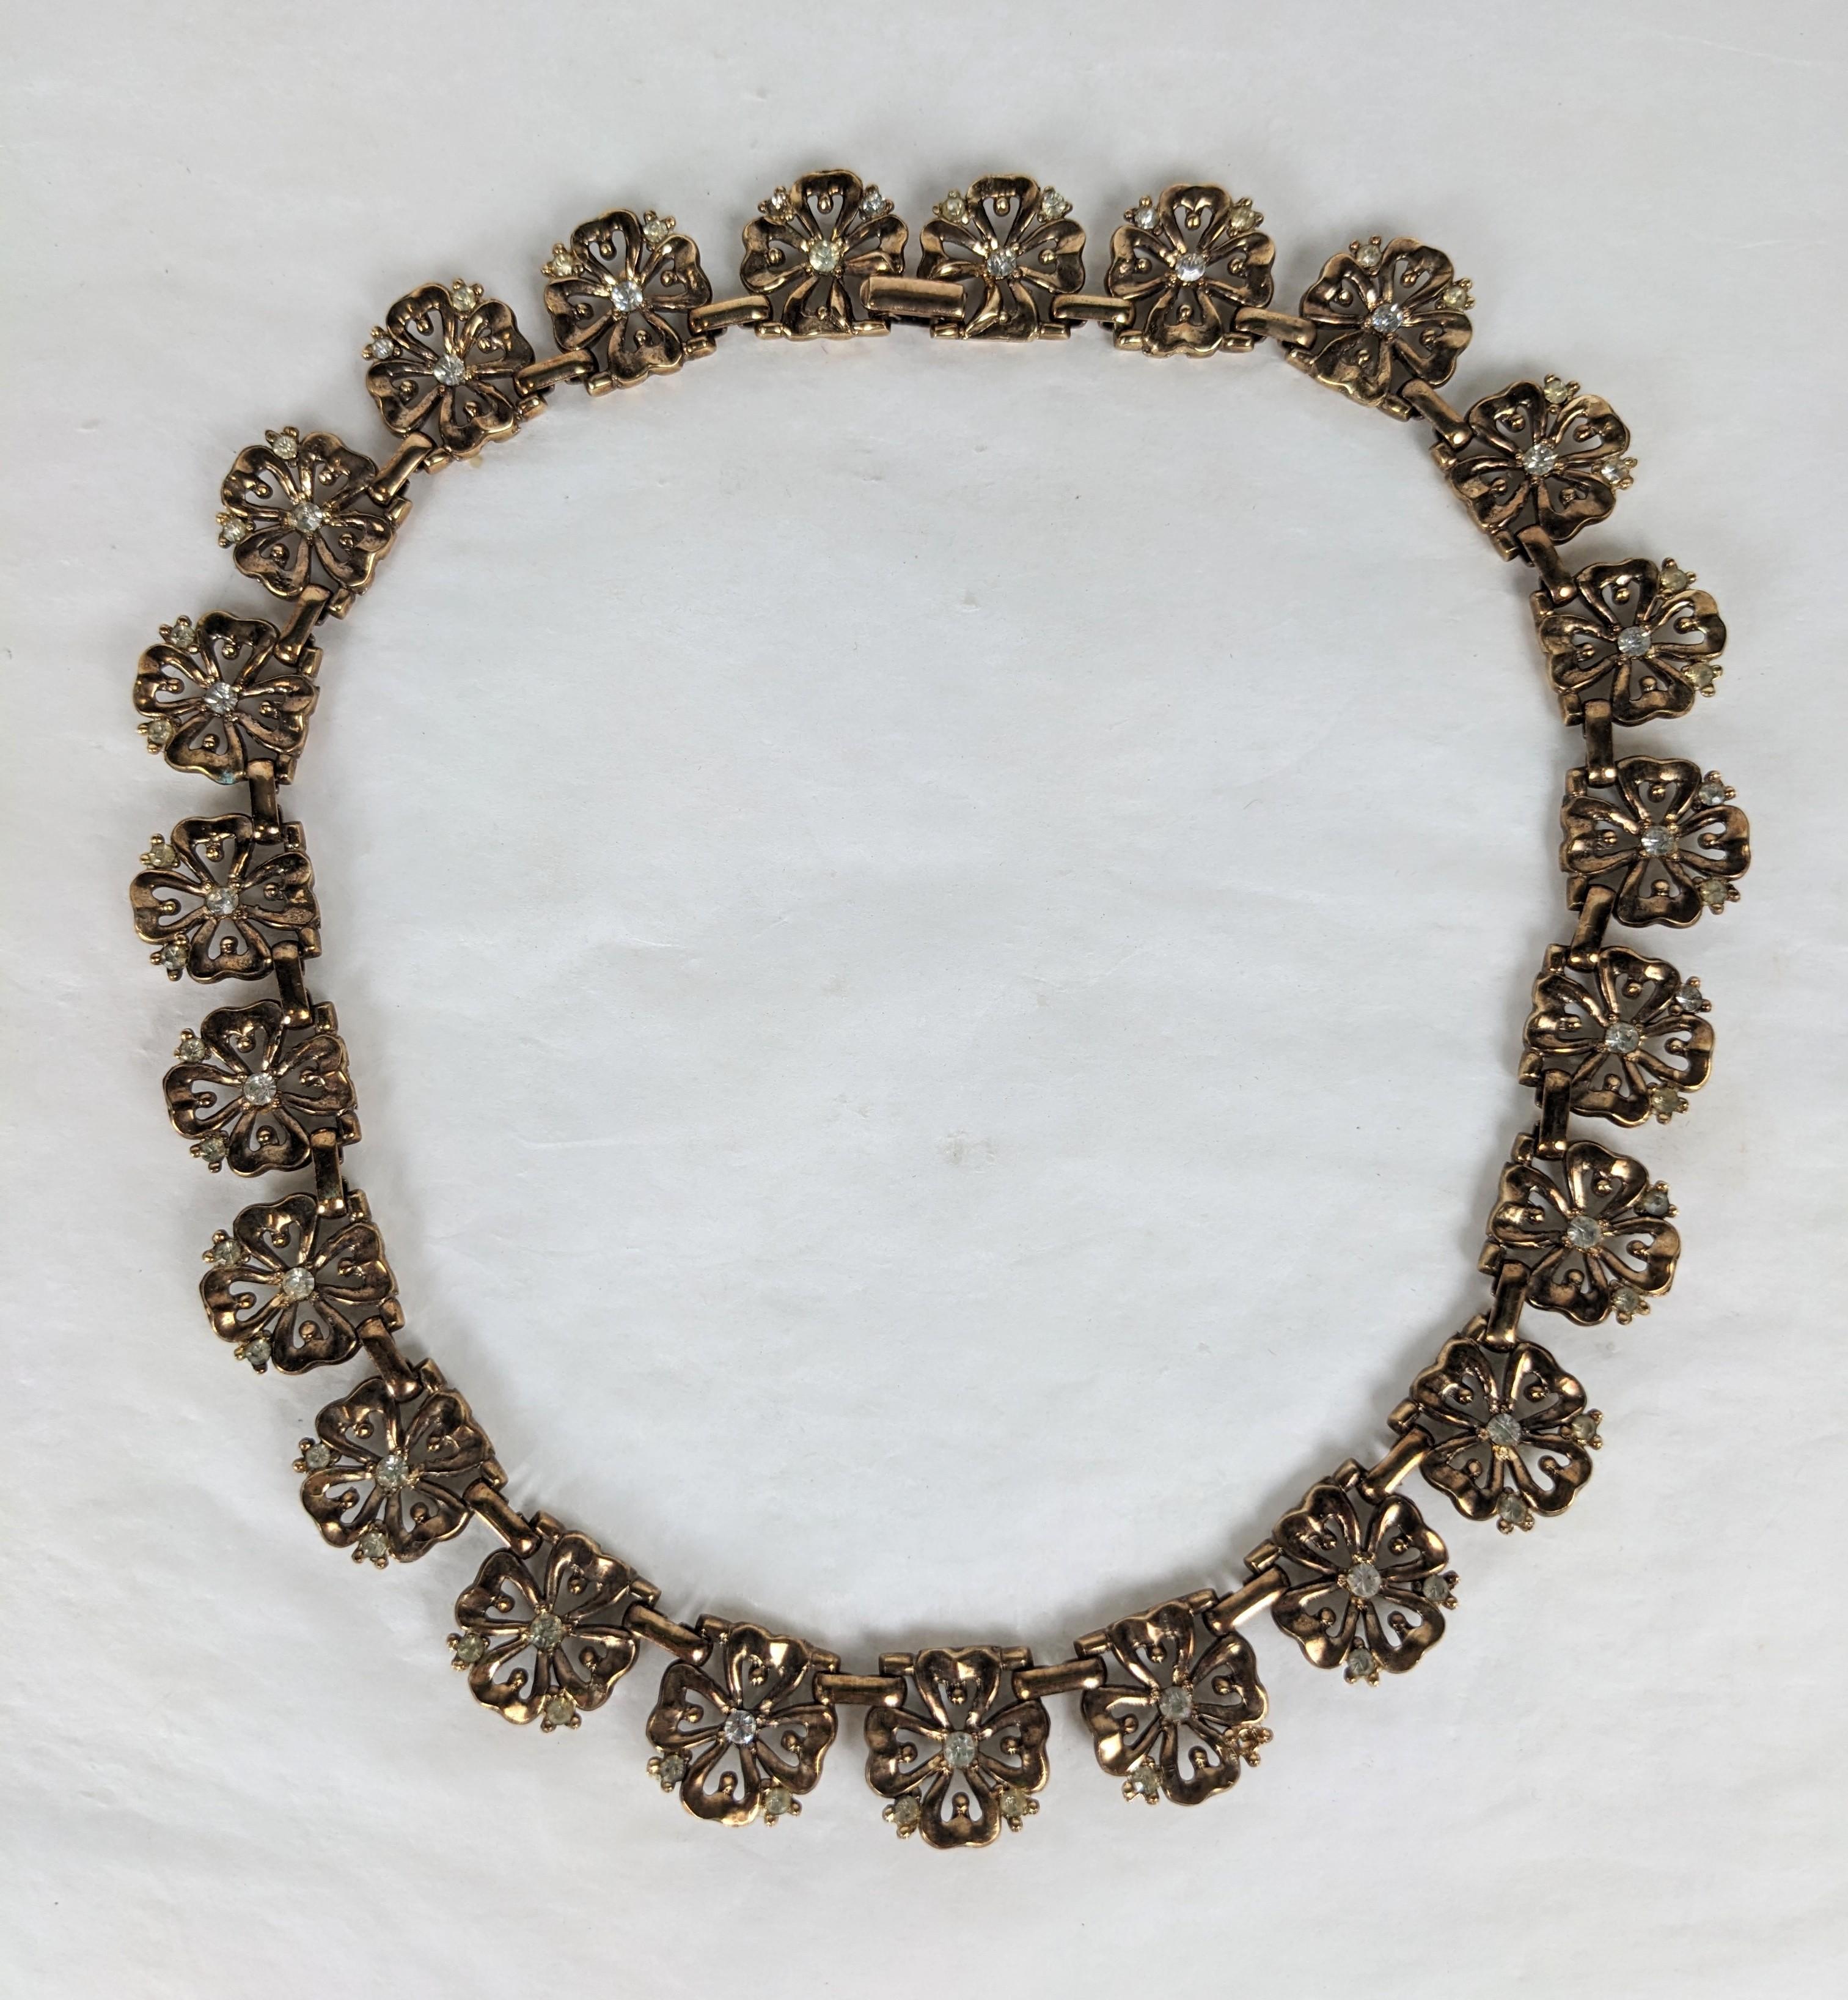 Elegant Trifari Rose Gold Plate Pansy Link Necklace from the 1940's with pave accents. Each link is a pierced floral with crystals. 16